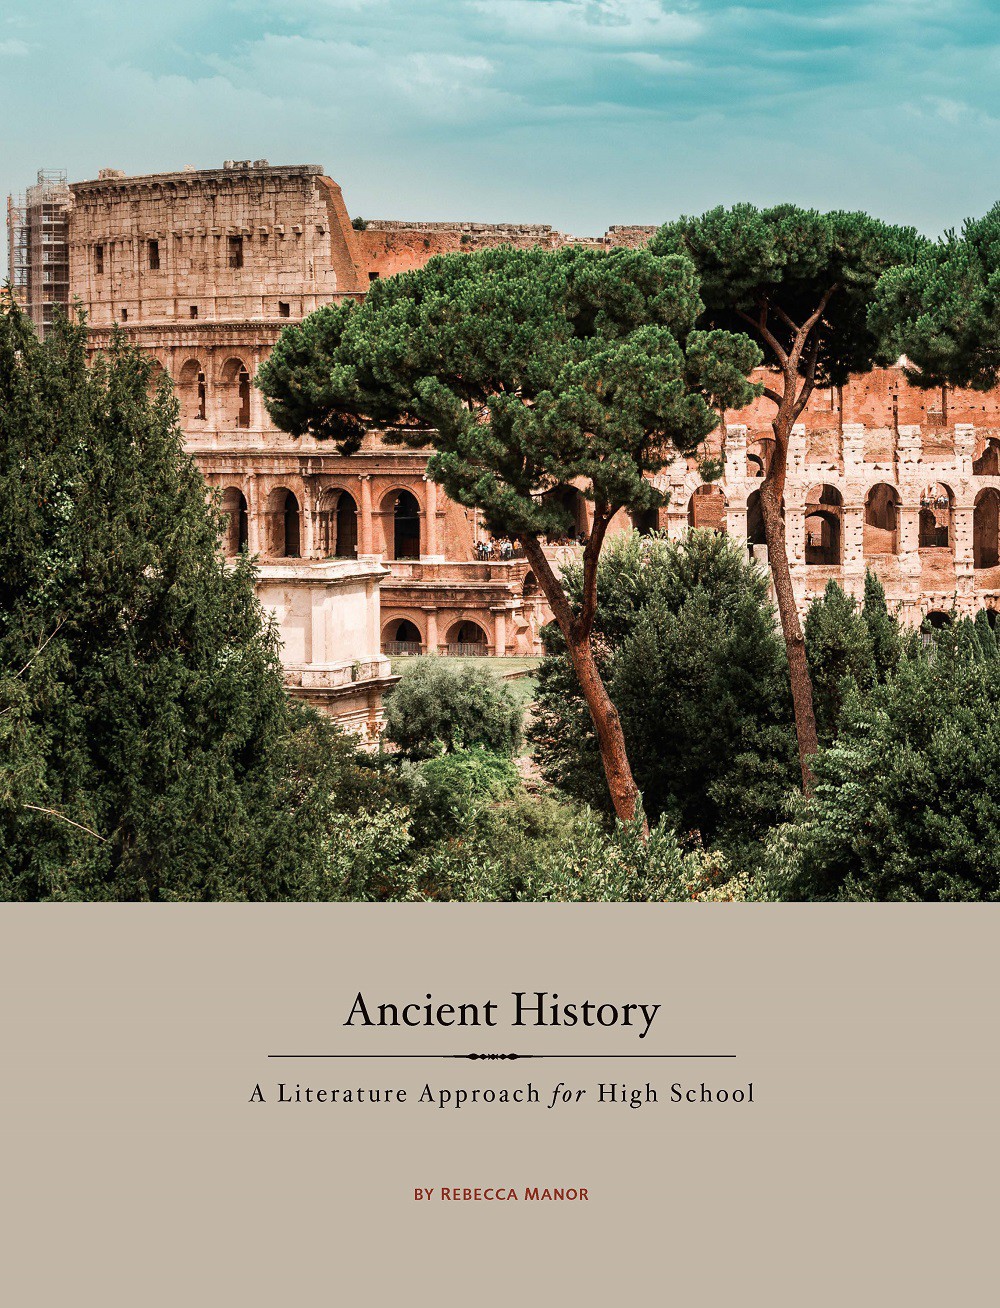 ANCIENT HISTORY TEACHER GUIDE FOR HS